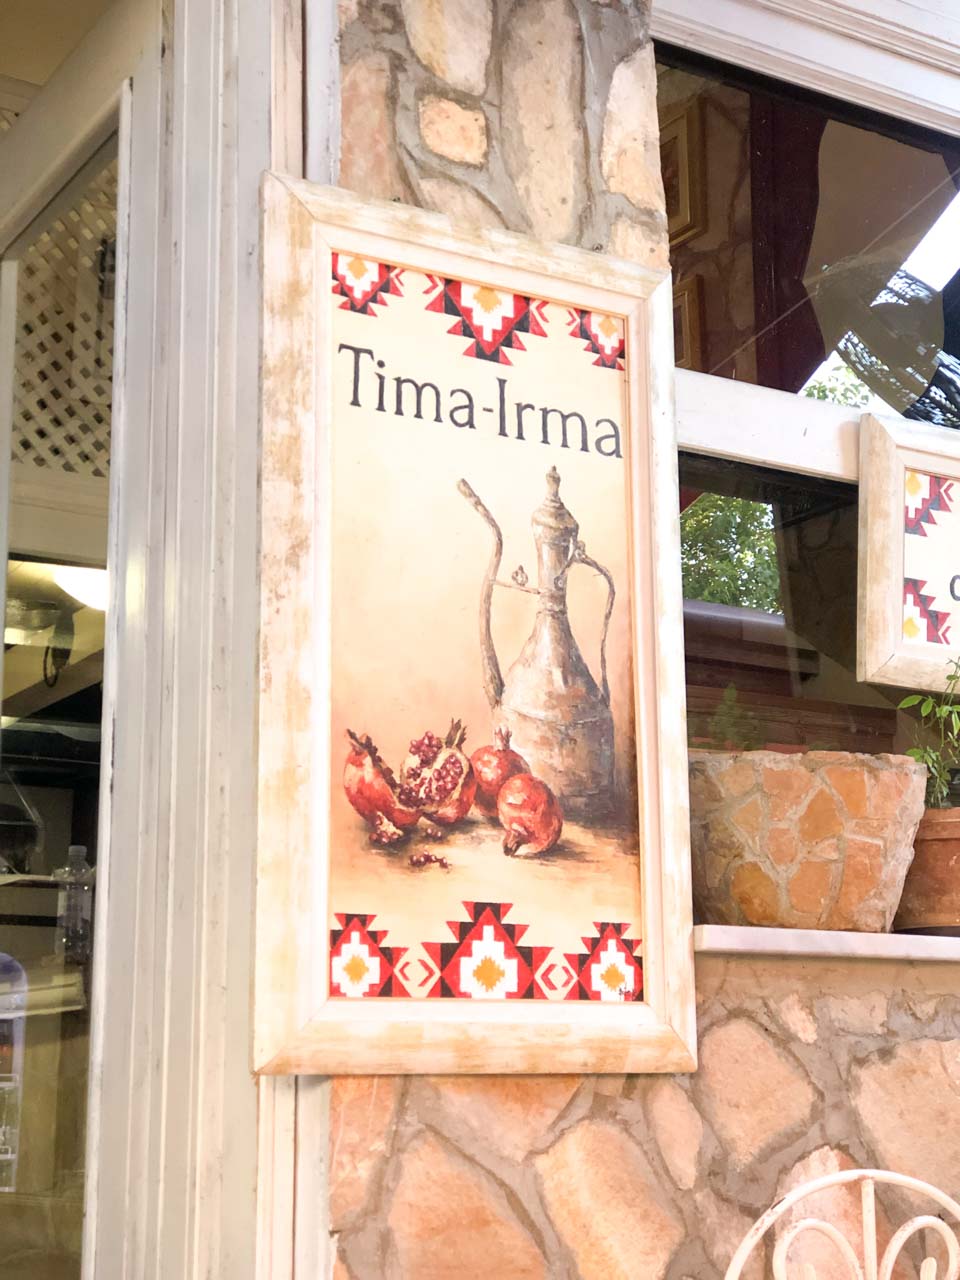 A sign outside the Tima-Irma restaurant in Mostar